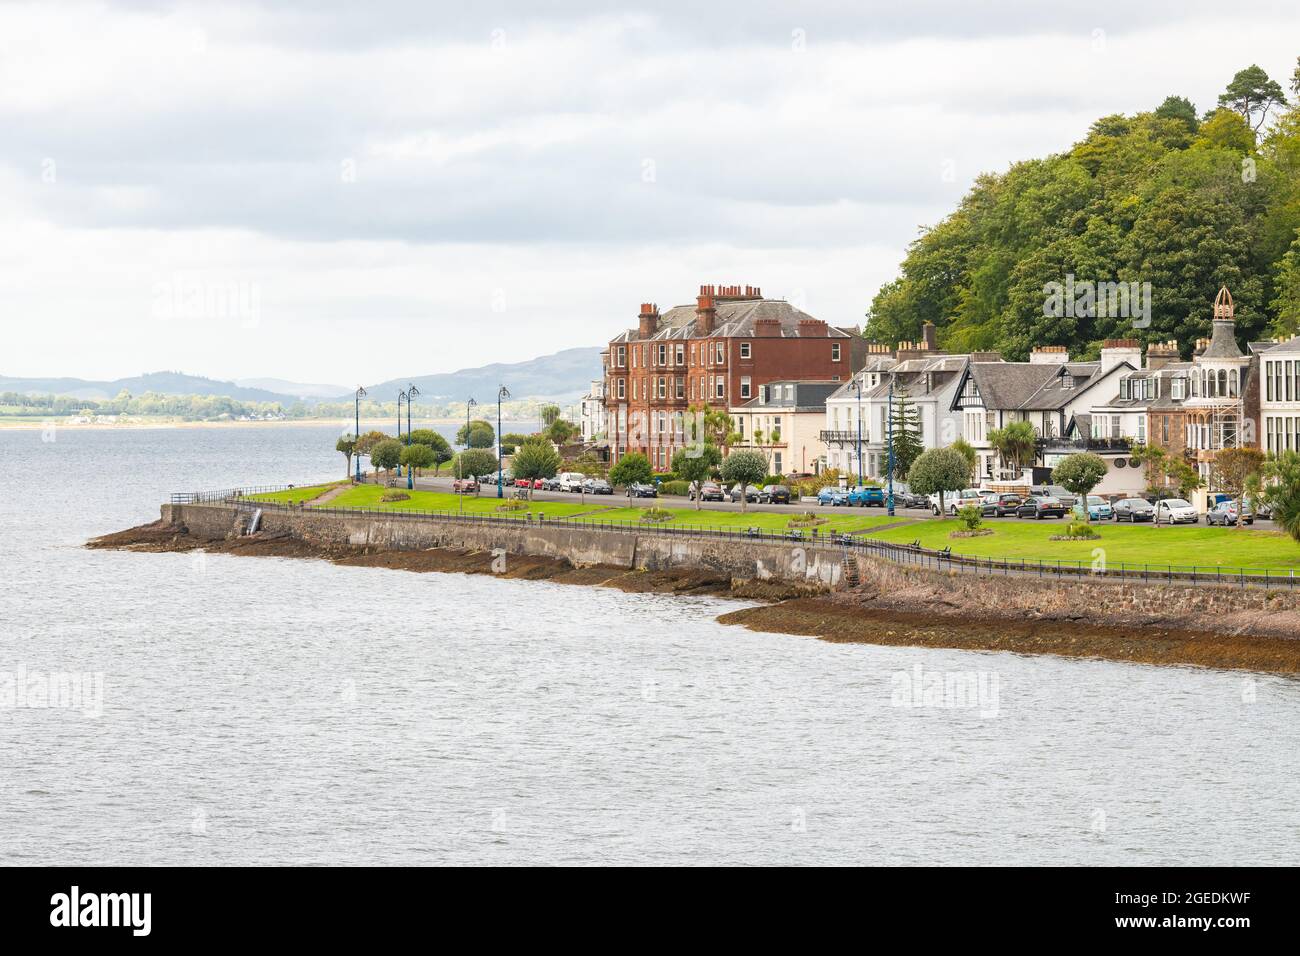 Rothesay, Battery Place, East Bay, Isle of Bute, Argyll and Bute, Schottland, Großbritannien Stockfoto